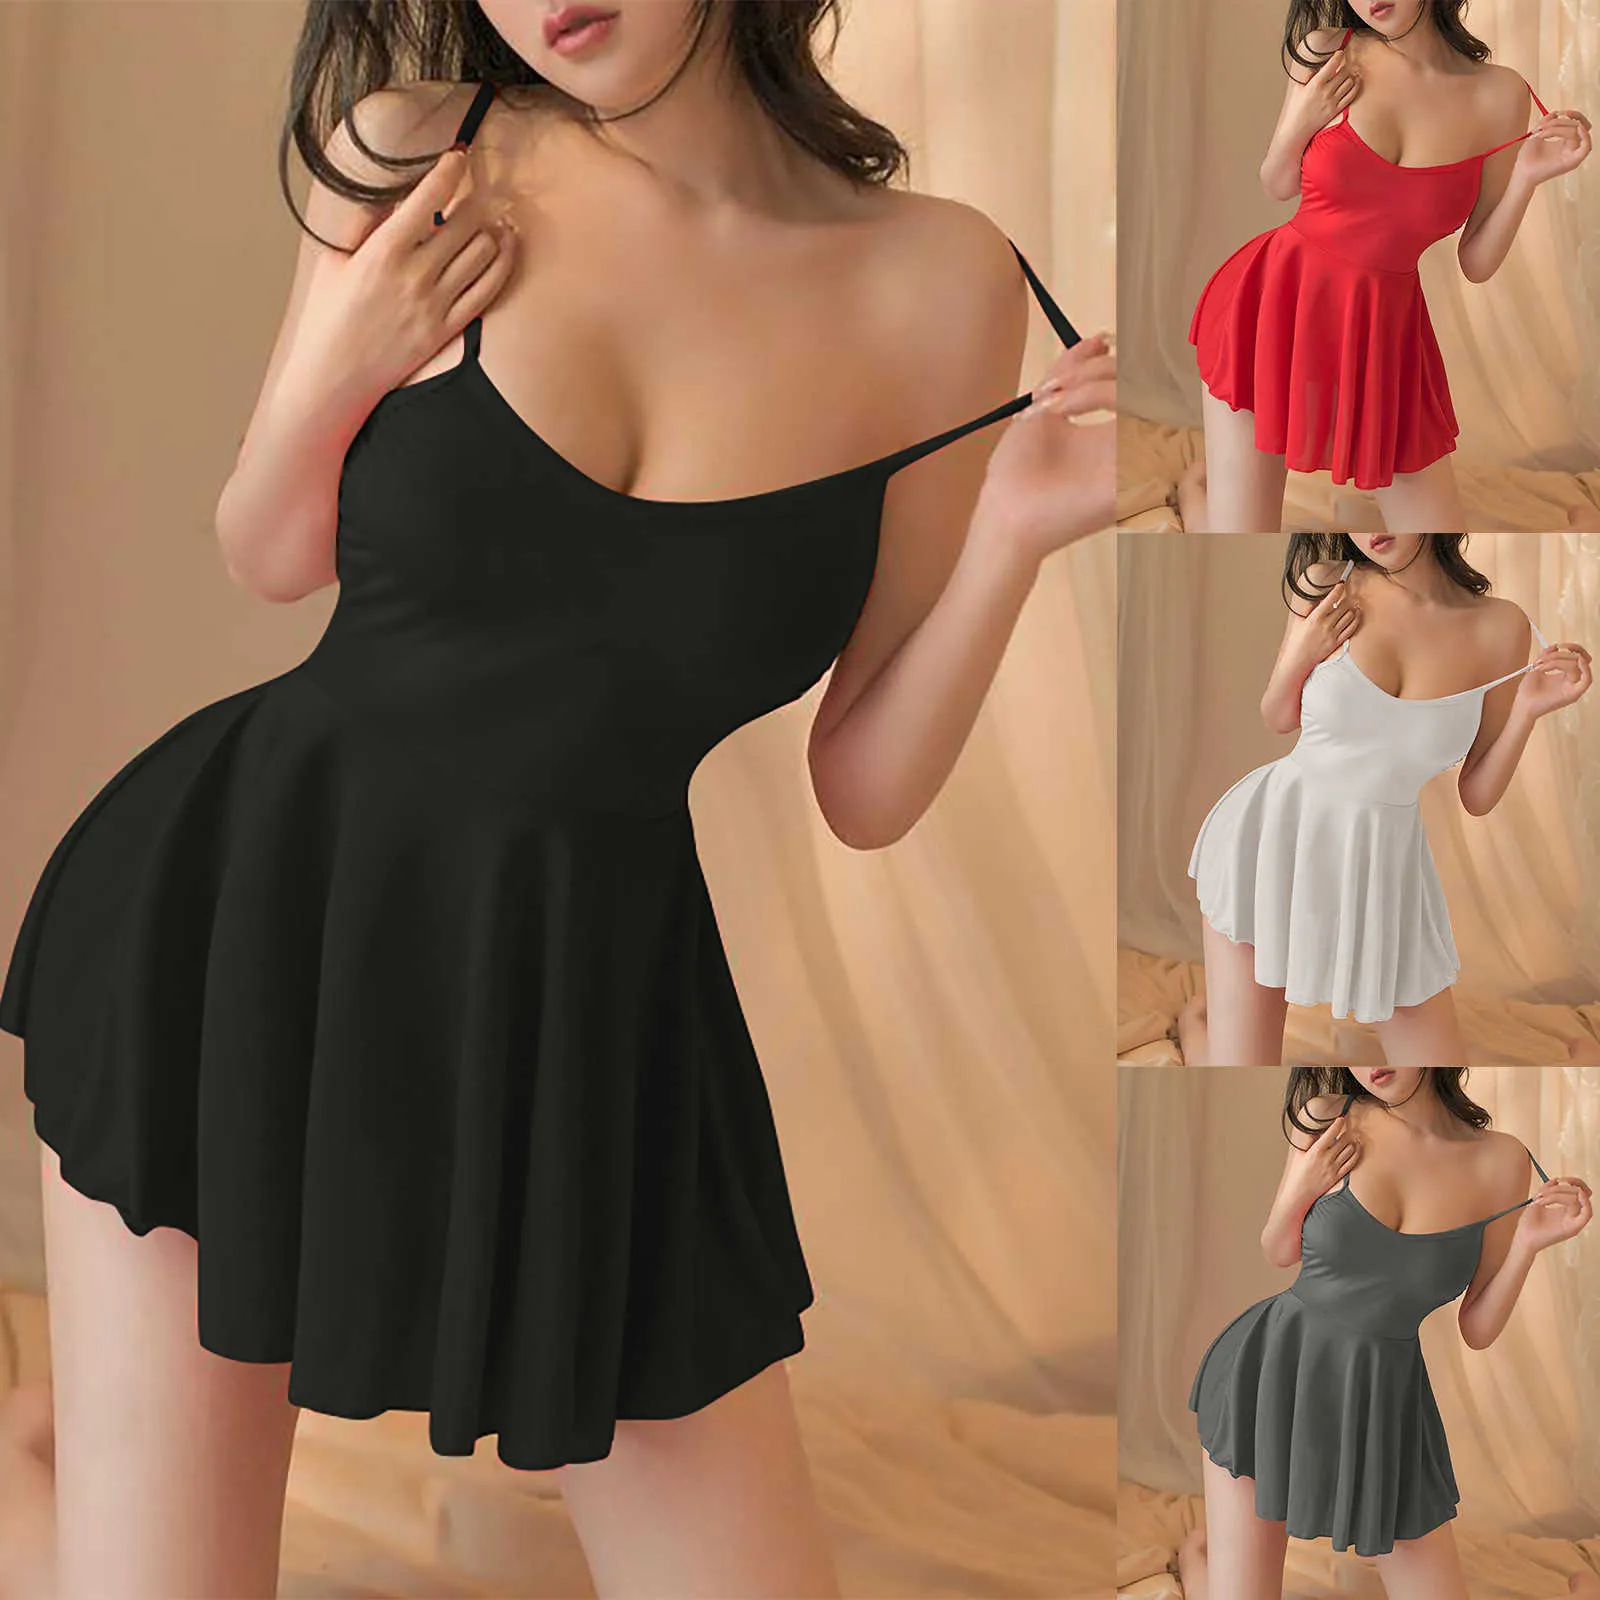 Silky Nightdress Set Back For Women Sexy Black Pajamas With Suspenders,  Perfect For Fashionable Lingerie Nude Nightgown For 18 Plus Y2302 From  Misihan09, $10.64